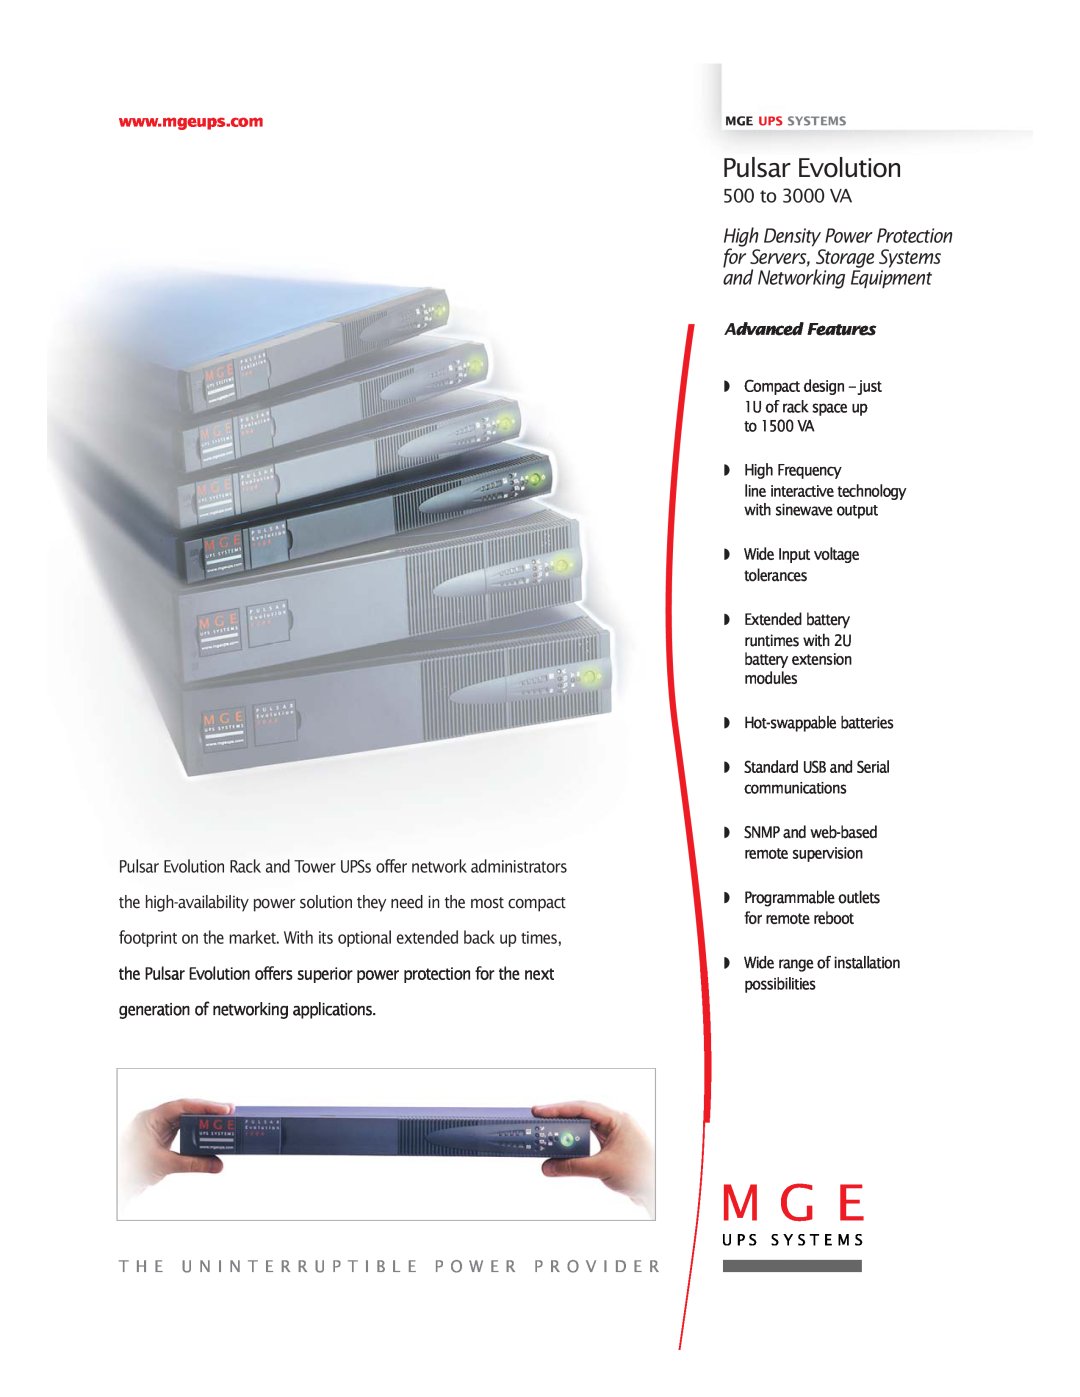 MGE UPS Systems Uninterruptible Power Provider manual Pulsar Evolution, 500 to 3000 VA, Advanced Features, High Frequency 